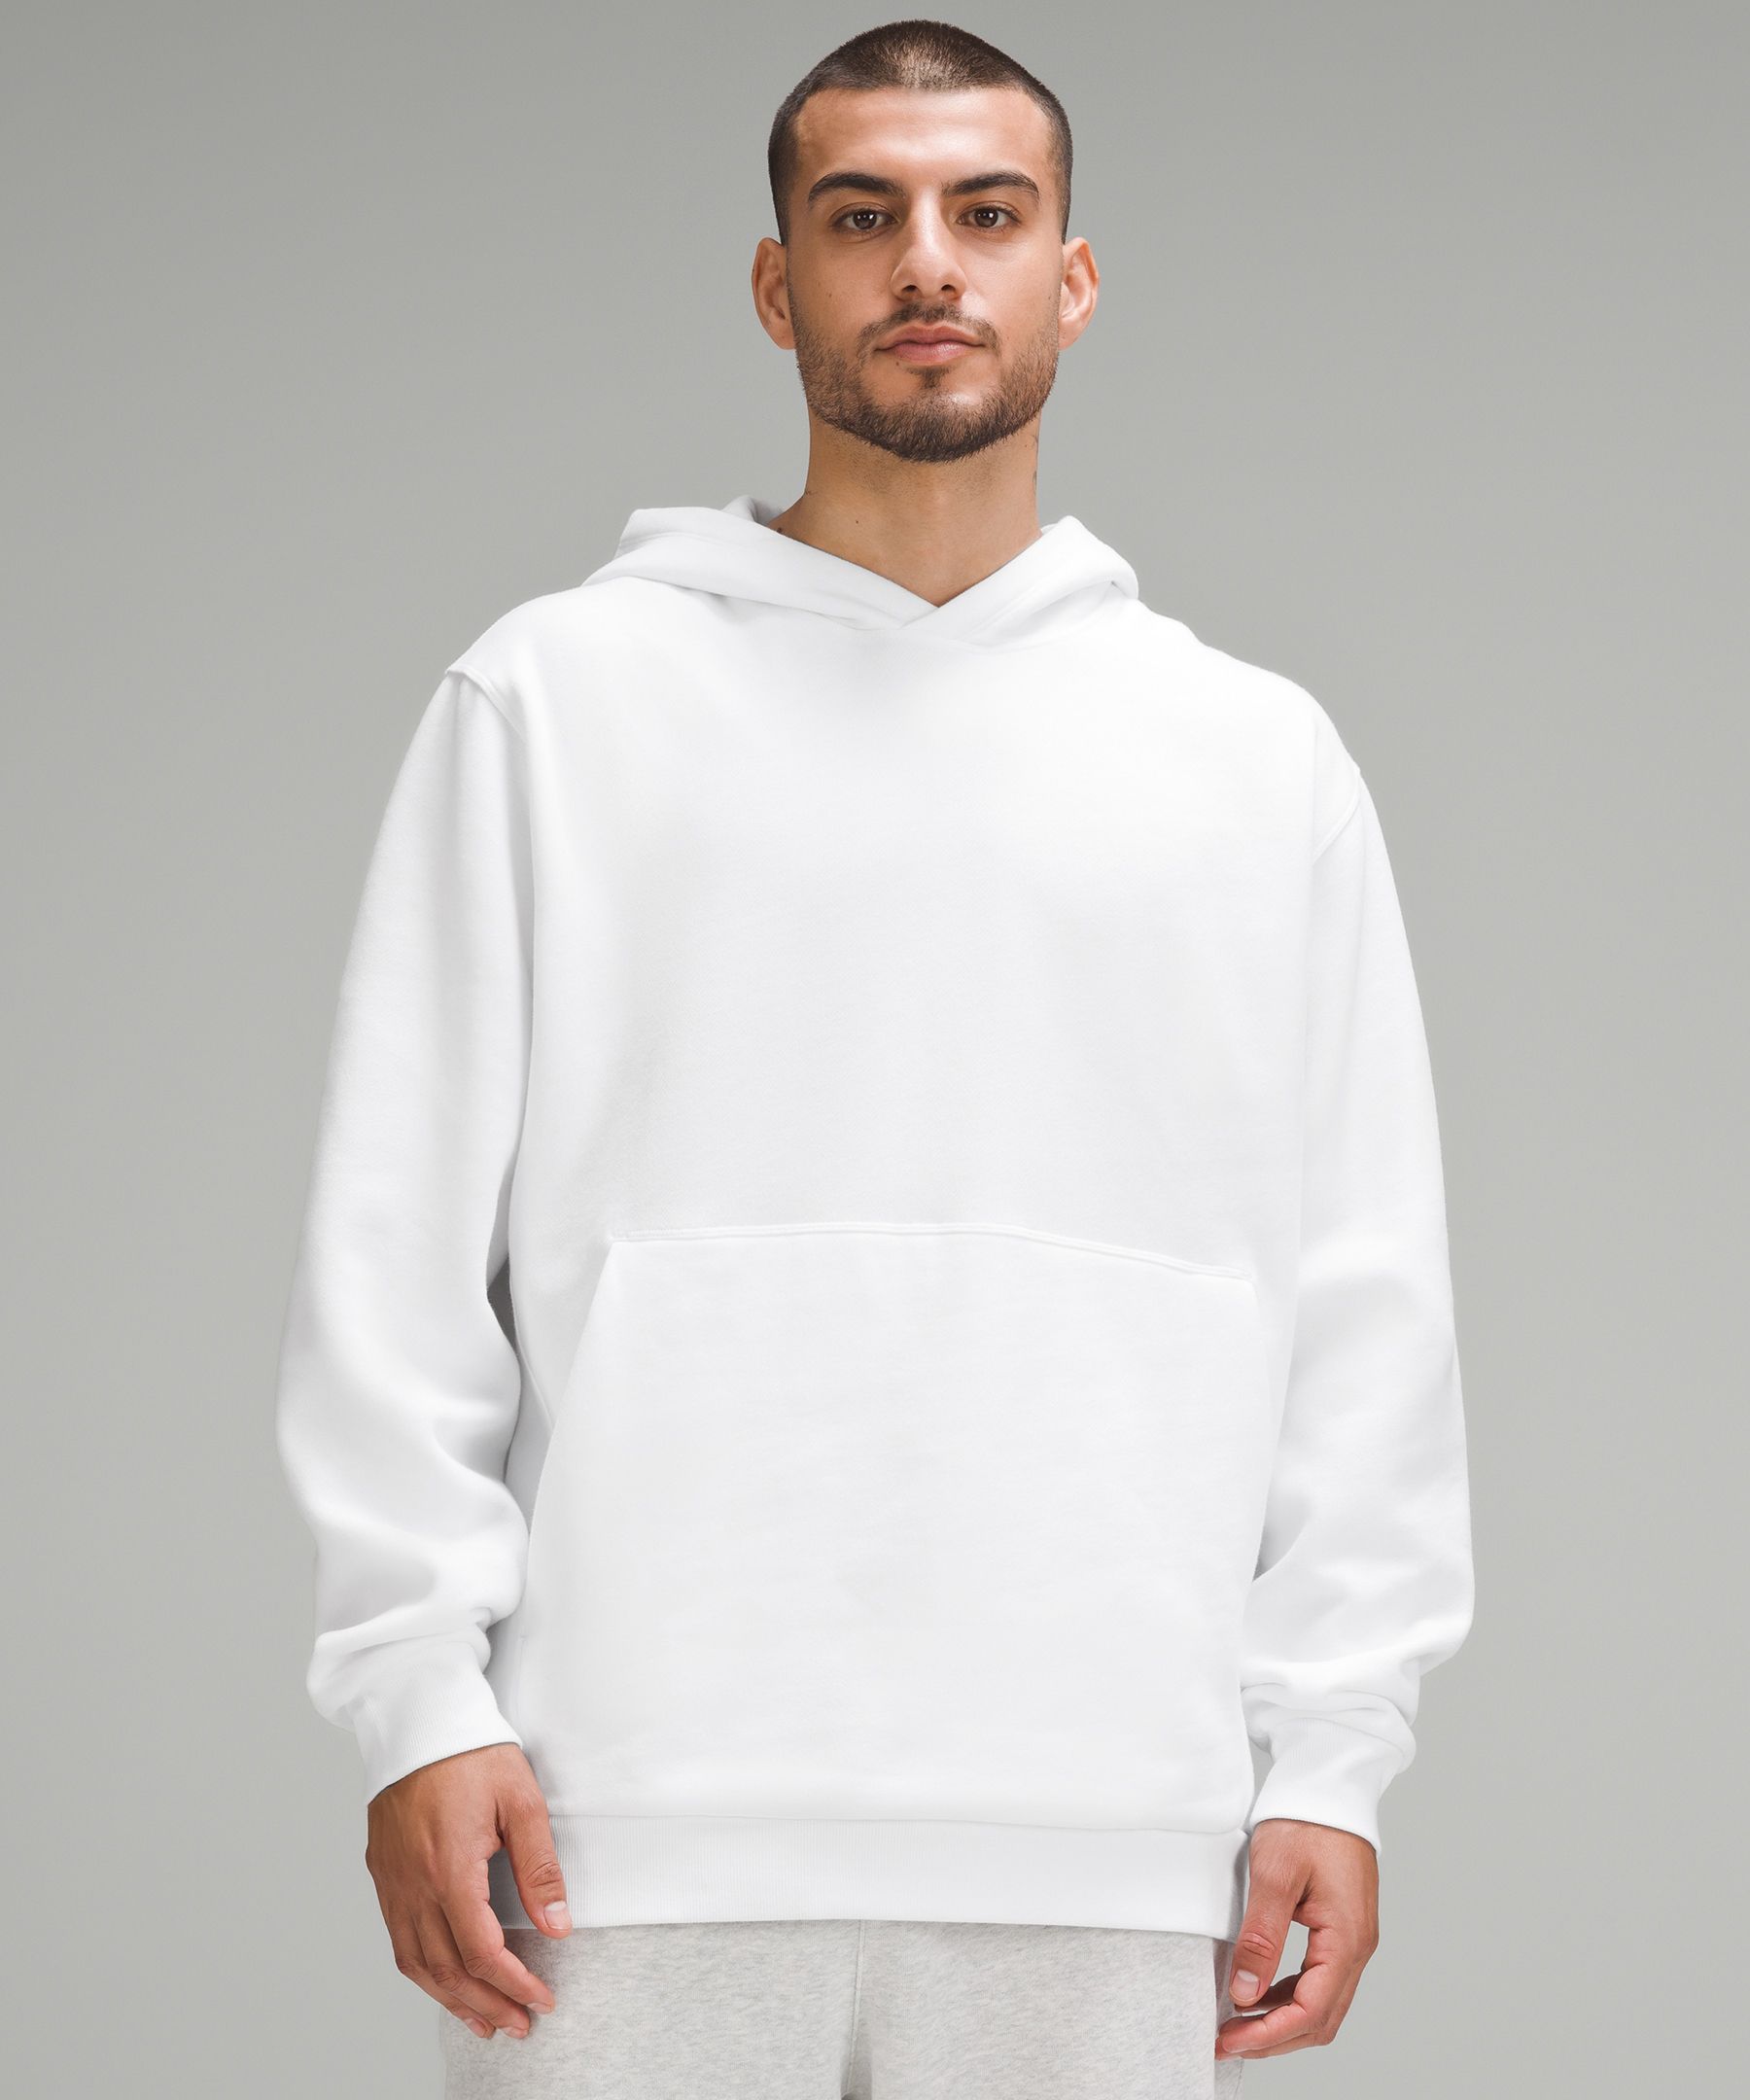 Lululemon Steady State Hoodie Color Natural Ivory Size: L. Retail $128.00  *NEW*